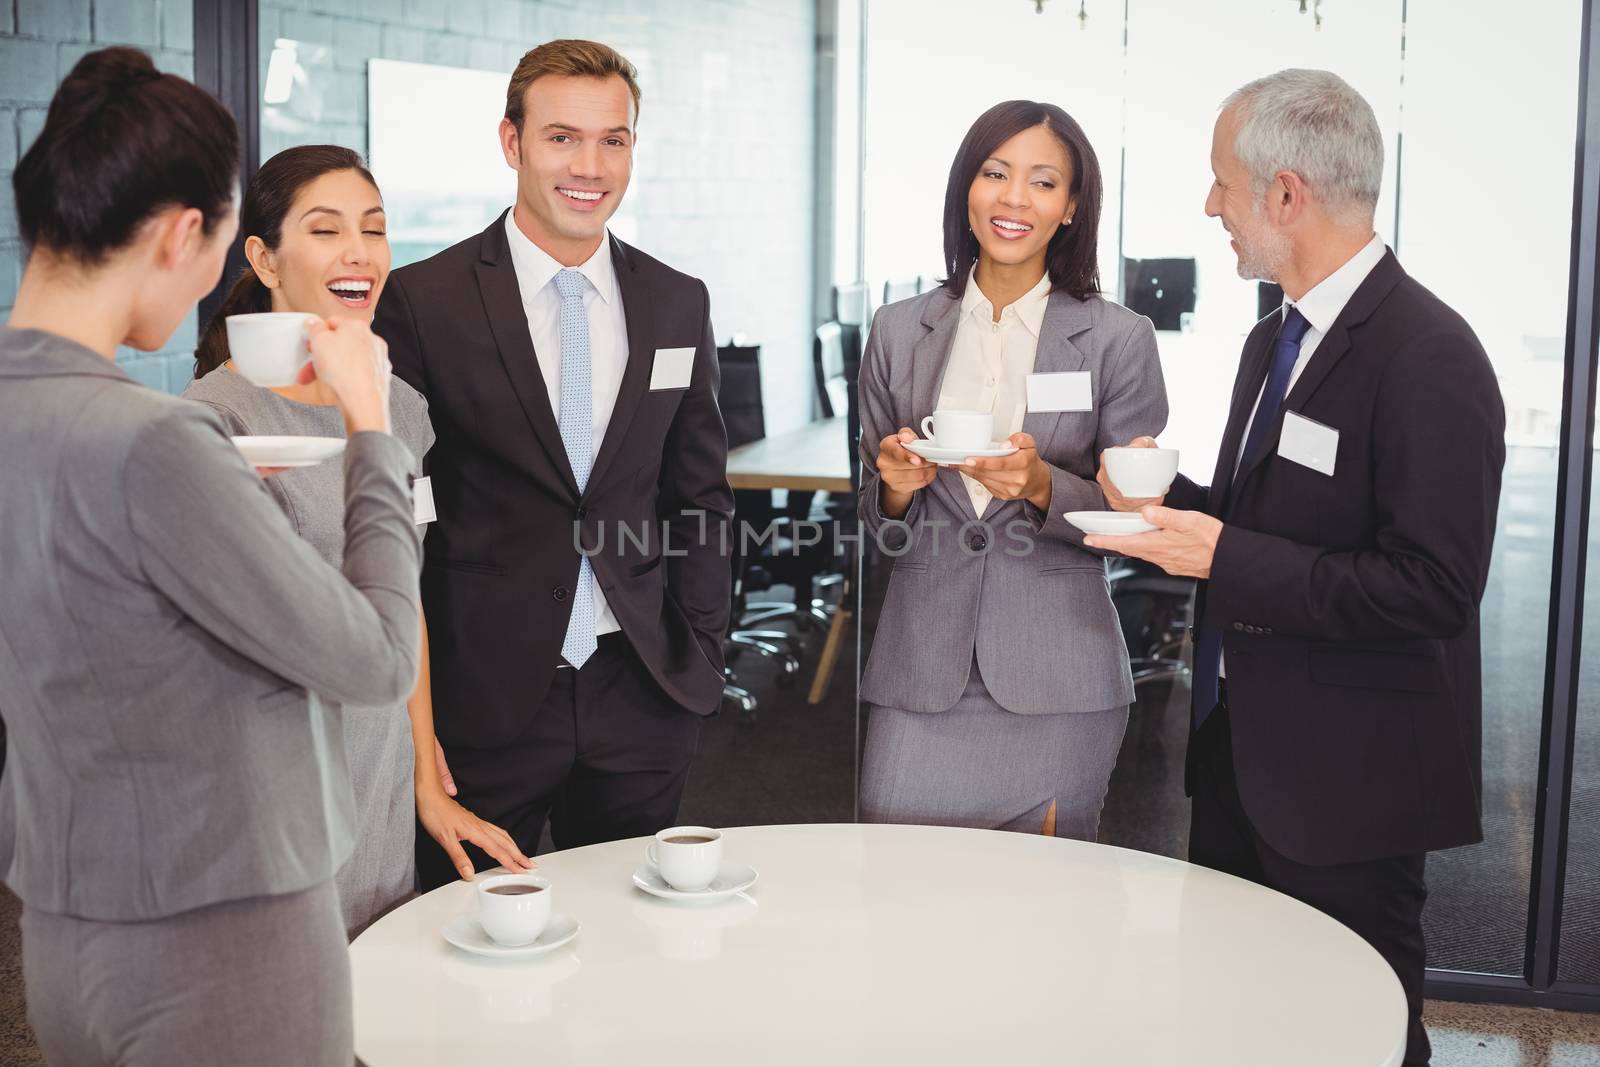 Businesspeople having tea and interacting during breaktime in office